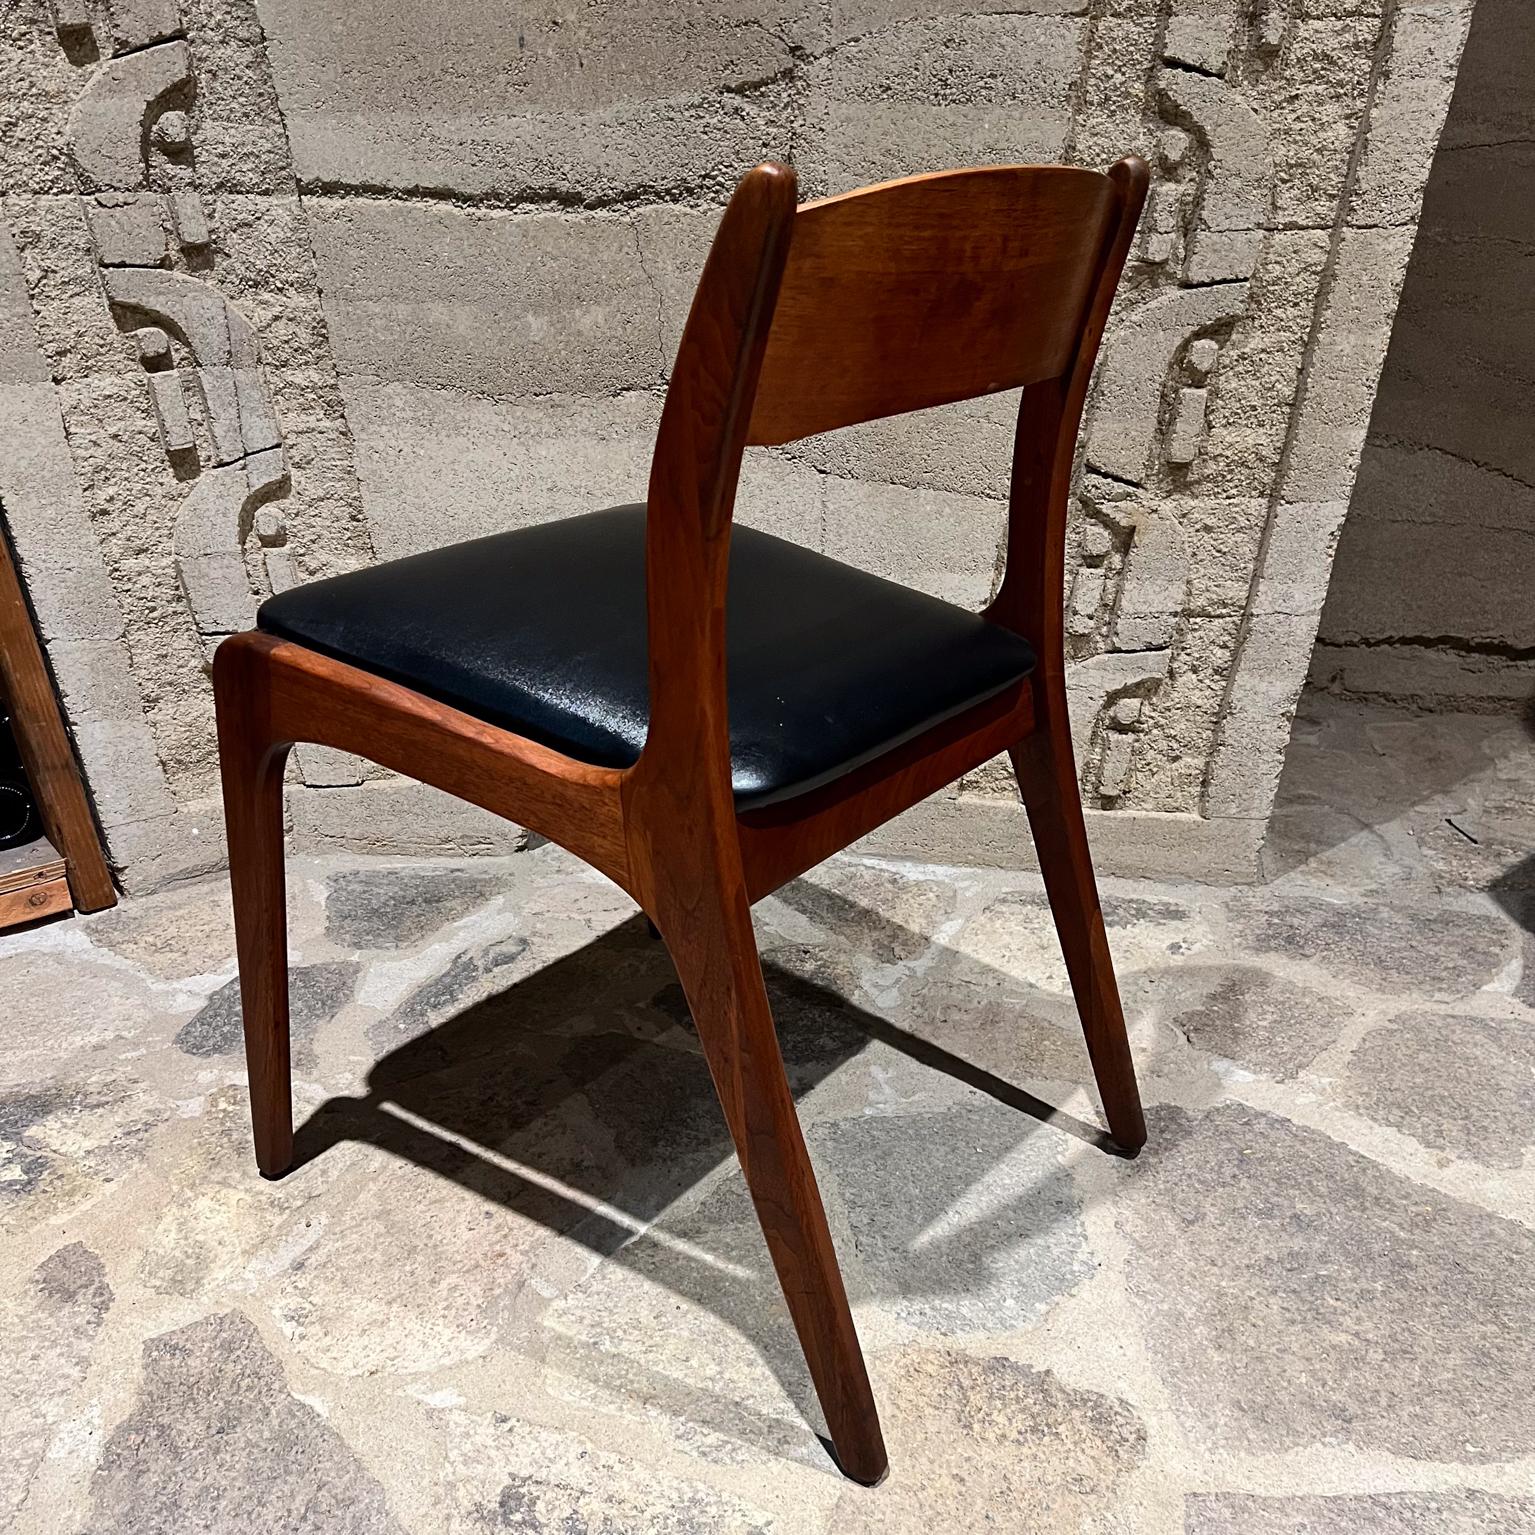 1960s by Richbilt MFG Two Danish Modern Dining Chairs 
in the Style of Johannes Andersen
Cincinnati Ohio
Retains original label
30.25 h x 21 d x 20.25 w Seat 19.25 h
Black Vinyl on Walnut Wood
Exceptional Craft
Preowned original vintage